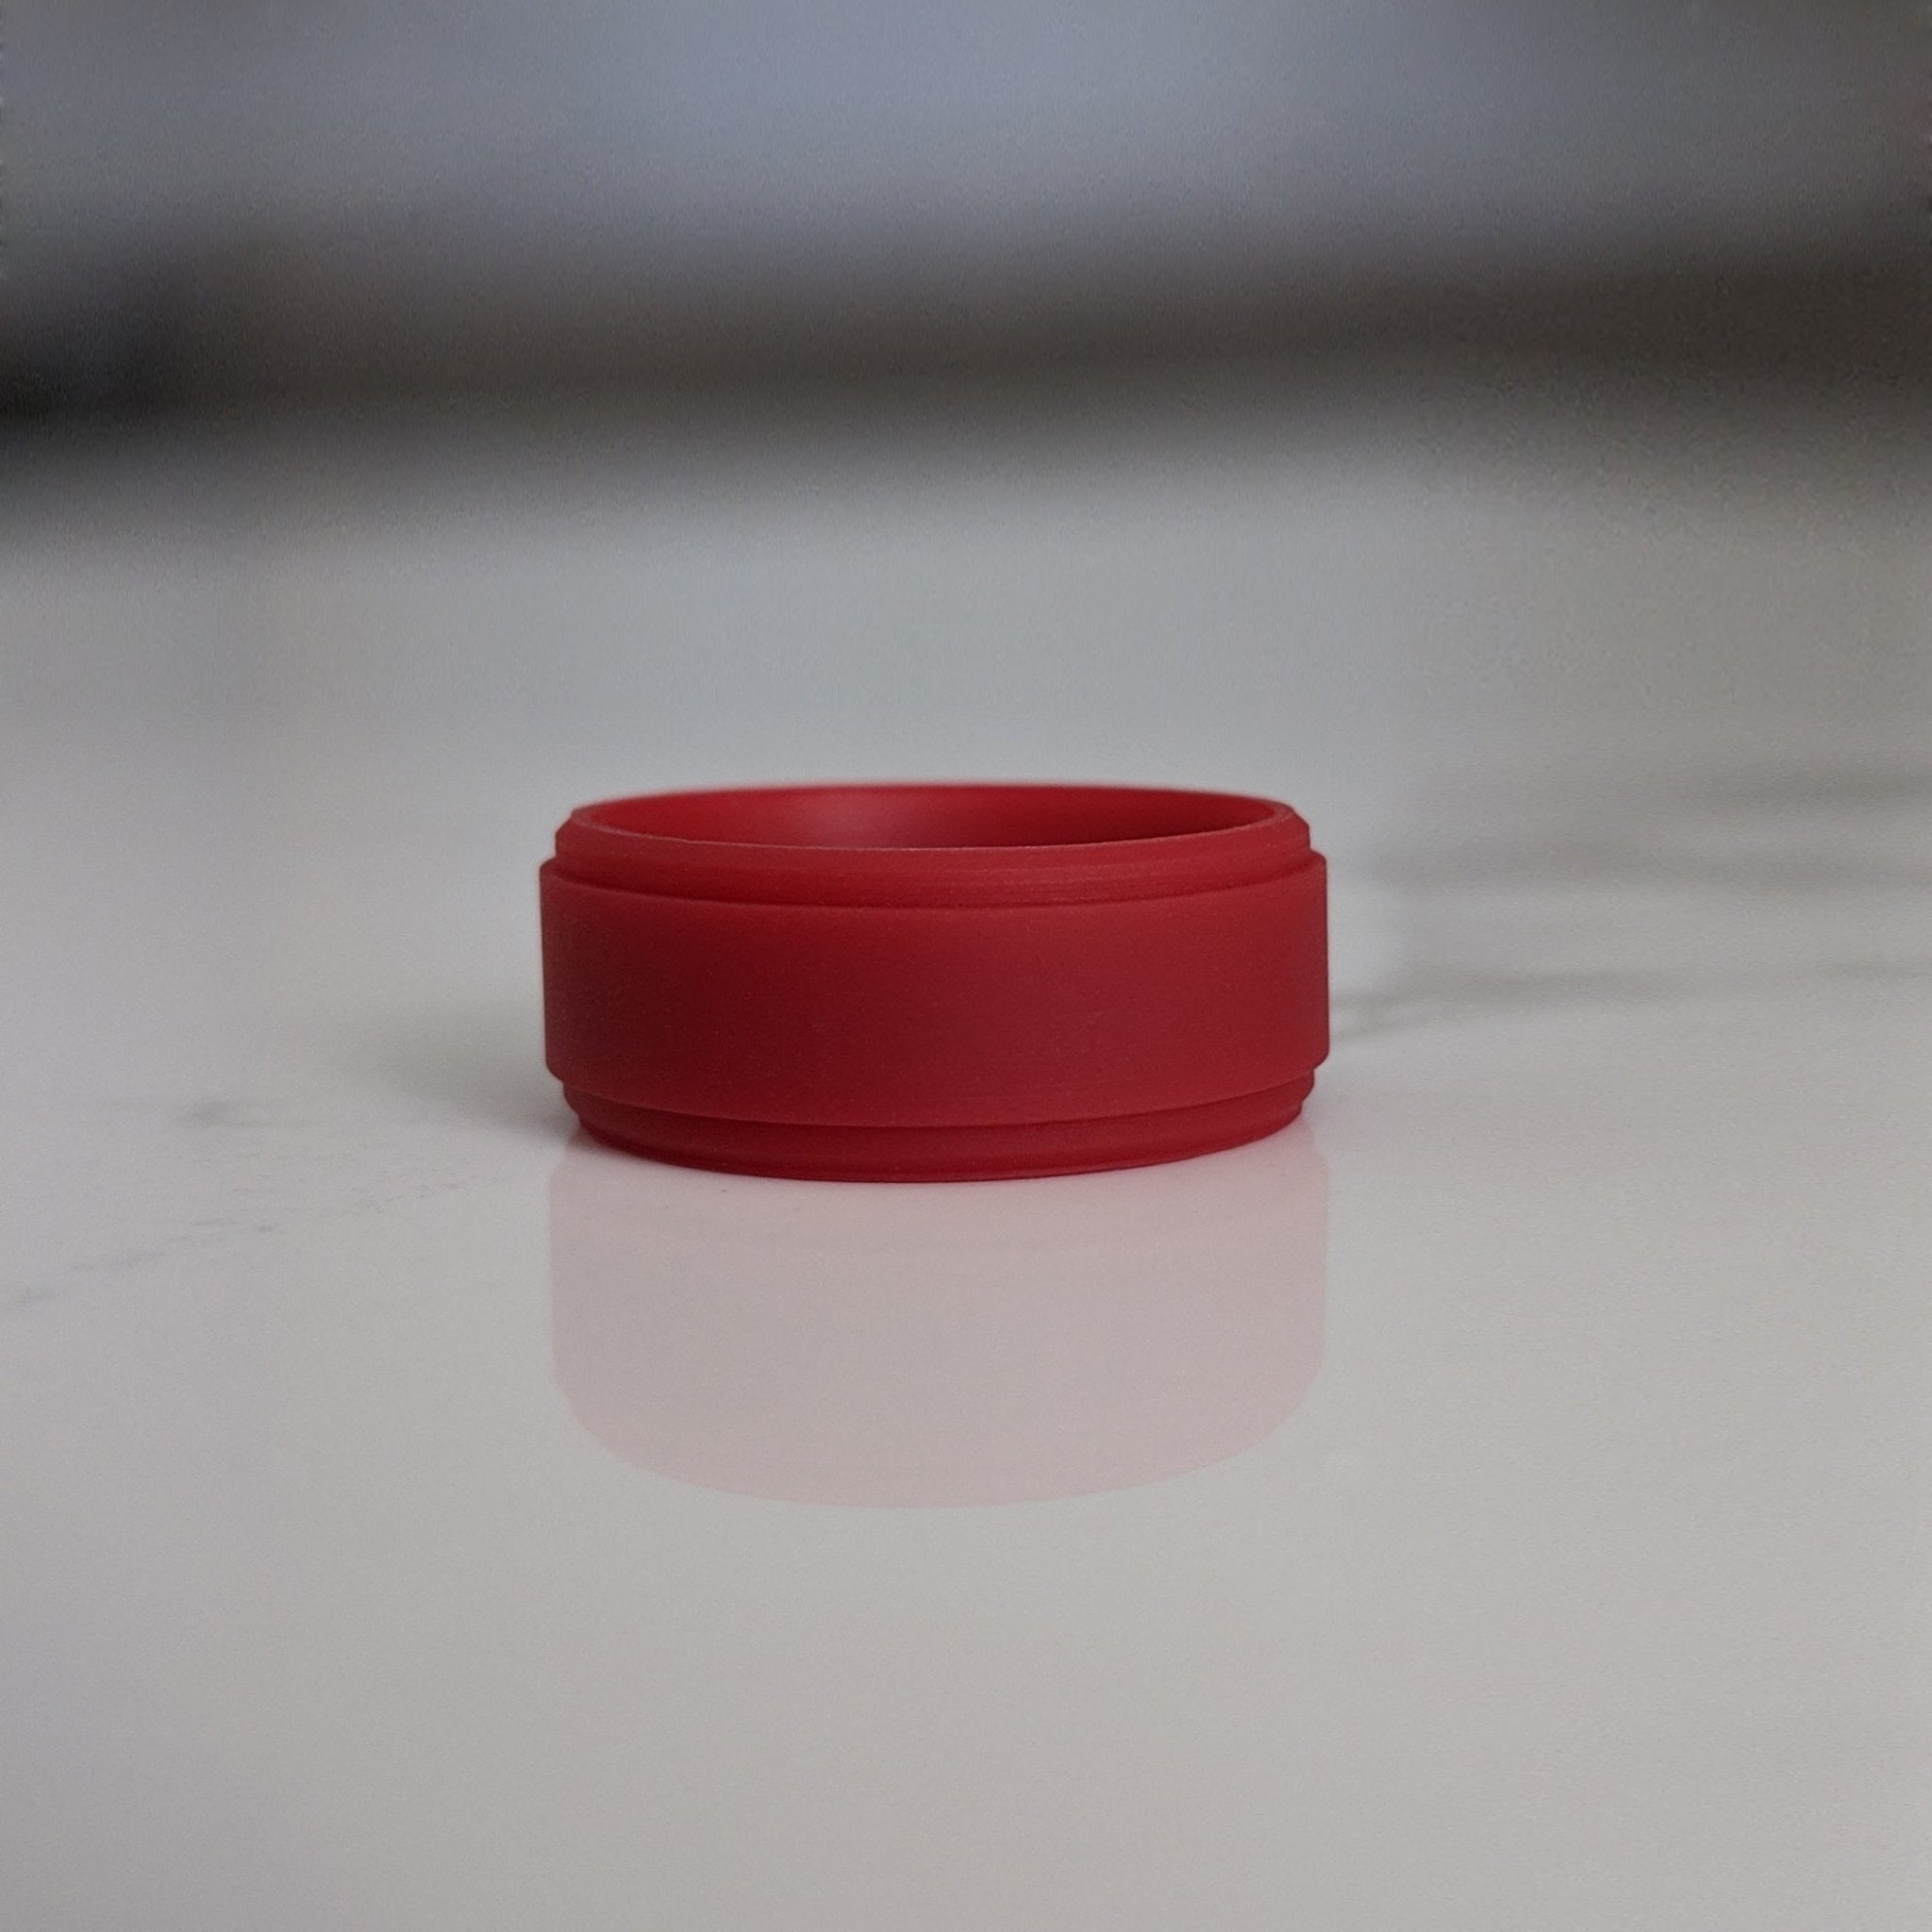 Deep Red Step Edge Breathable Silicone Ring for Men - Knot Theory